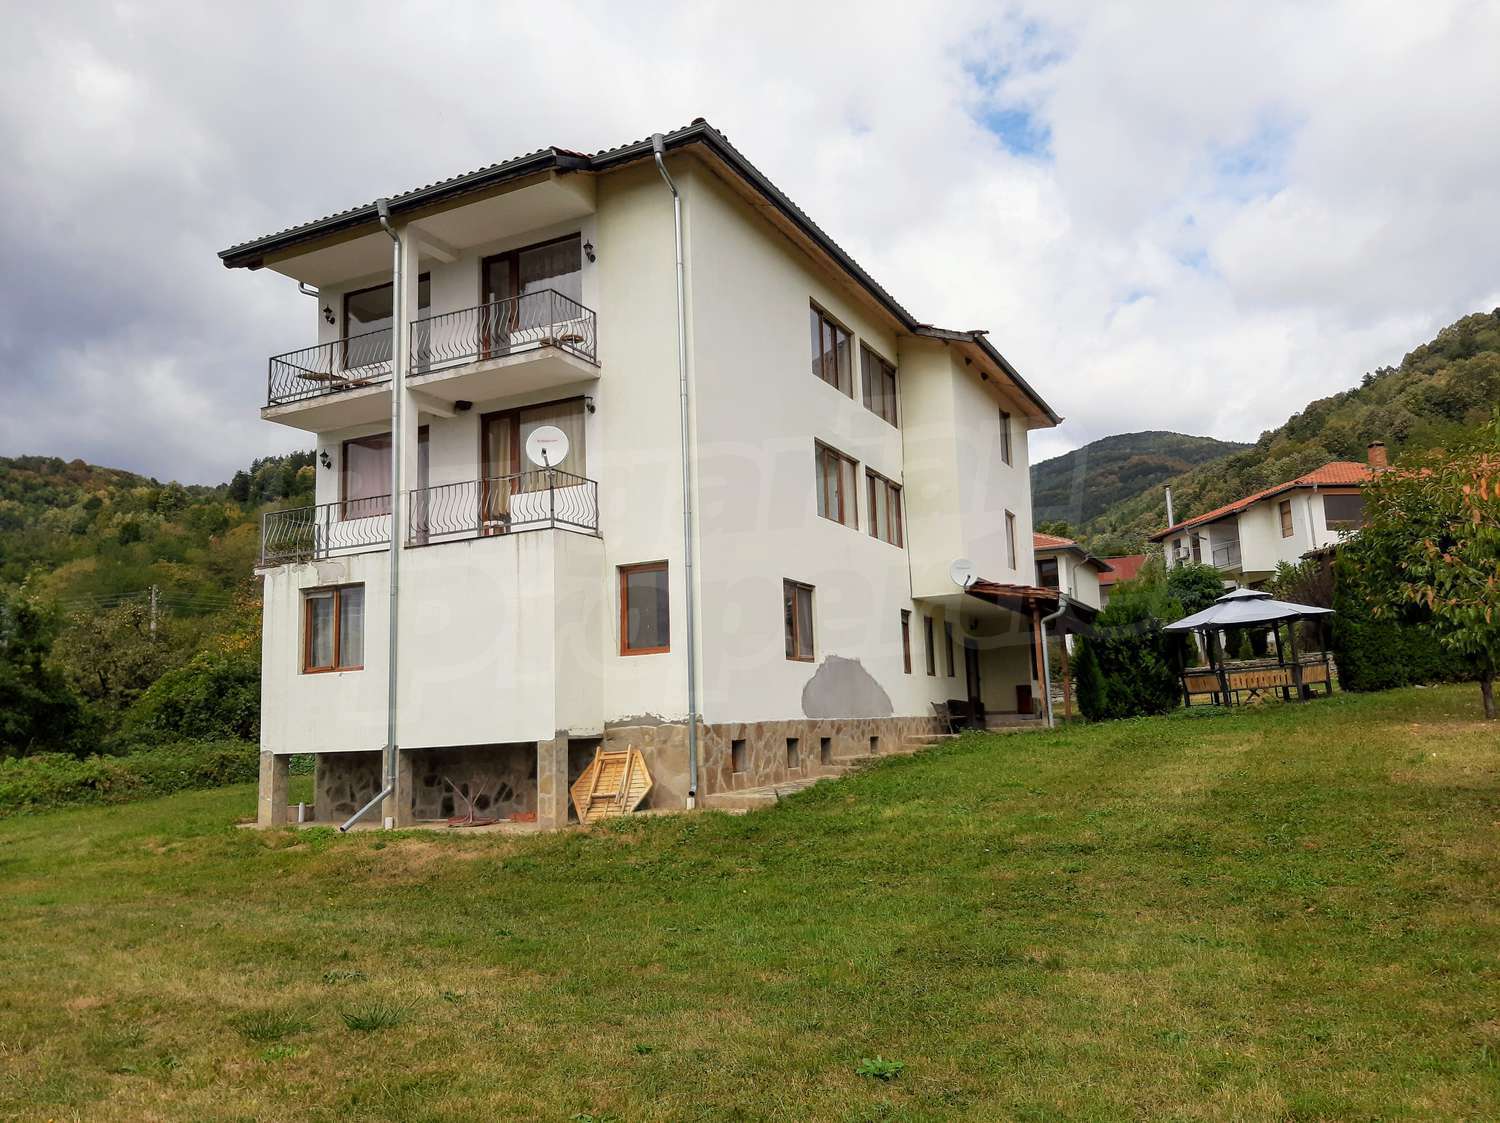 Mountain holiday complex of guest houses, restaurant, swimming pools and park areas near the town of Apriltsi